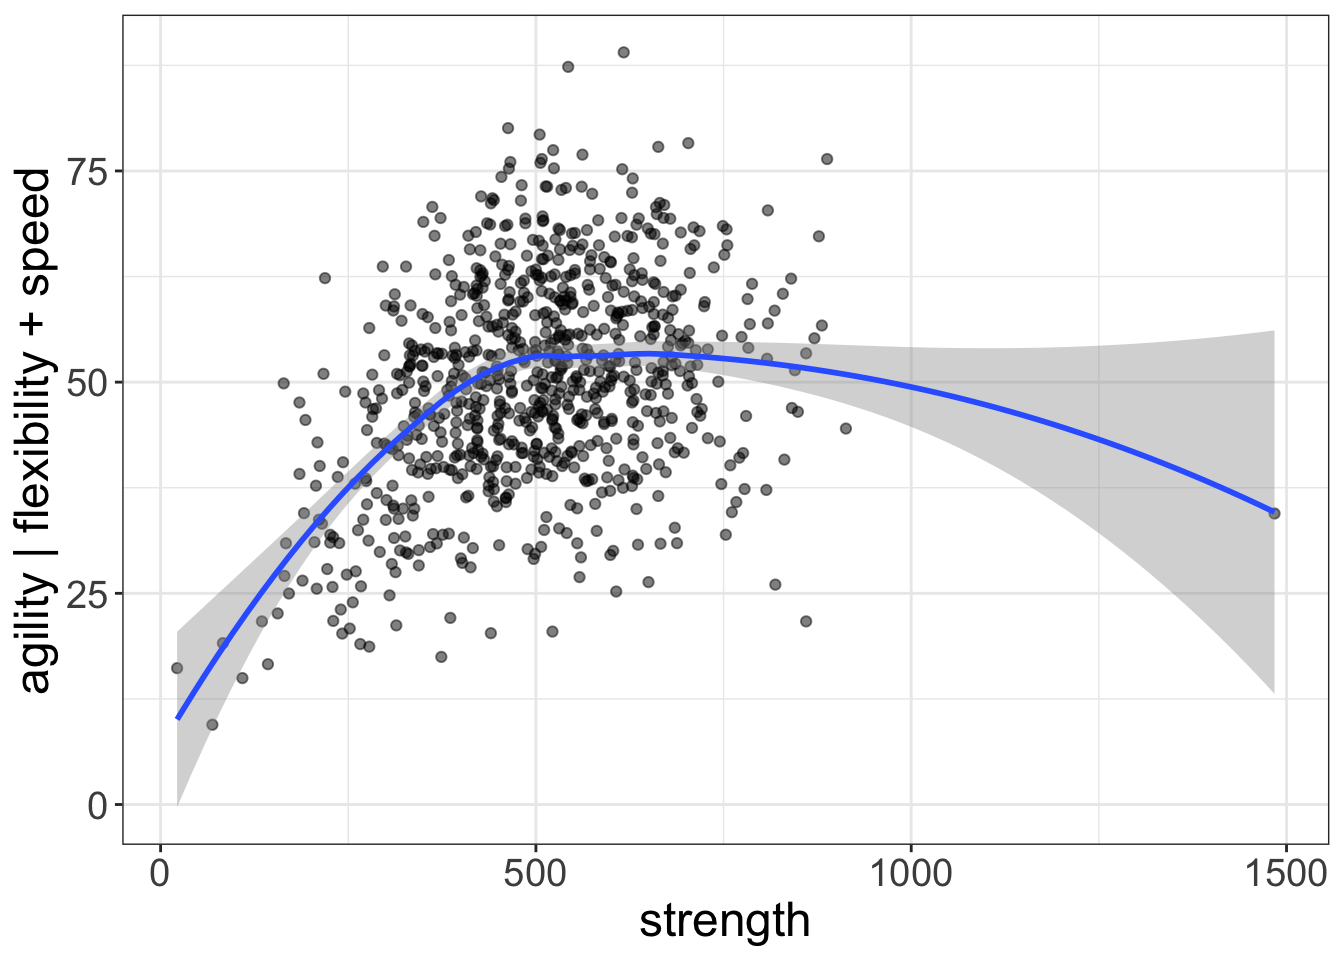 Plot of the relationship between strength and agility, after controlling for speed and flexibility. The blue lines represent the final fit of the quadratic regression model.